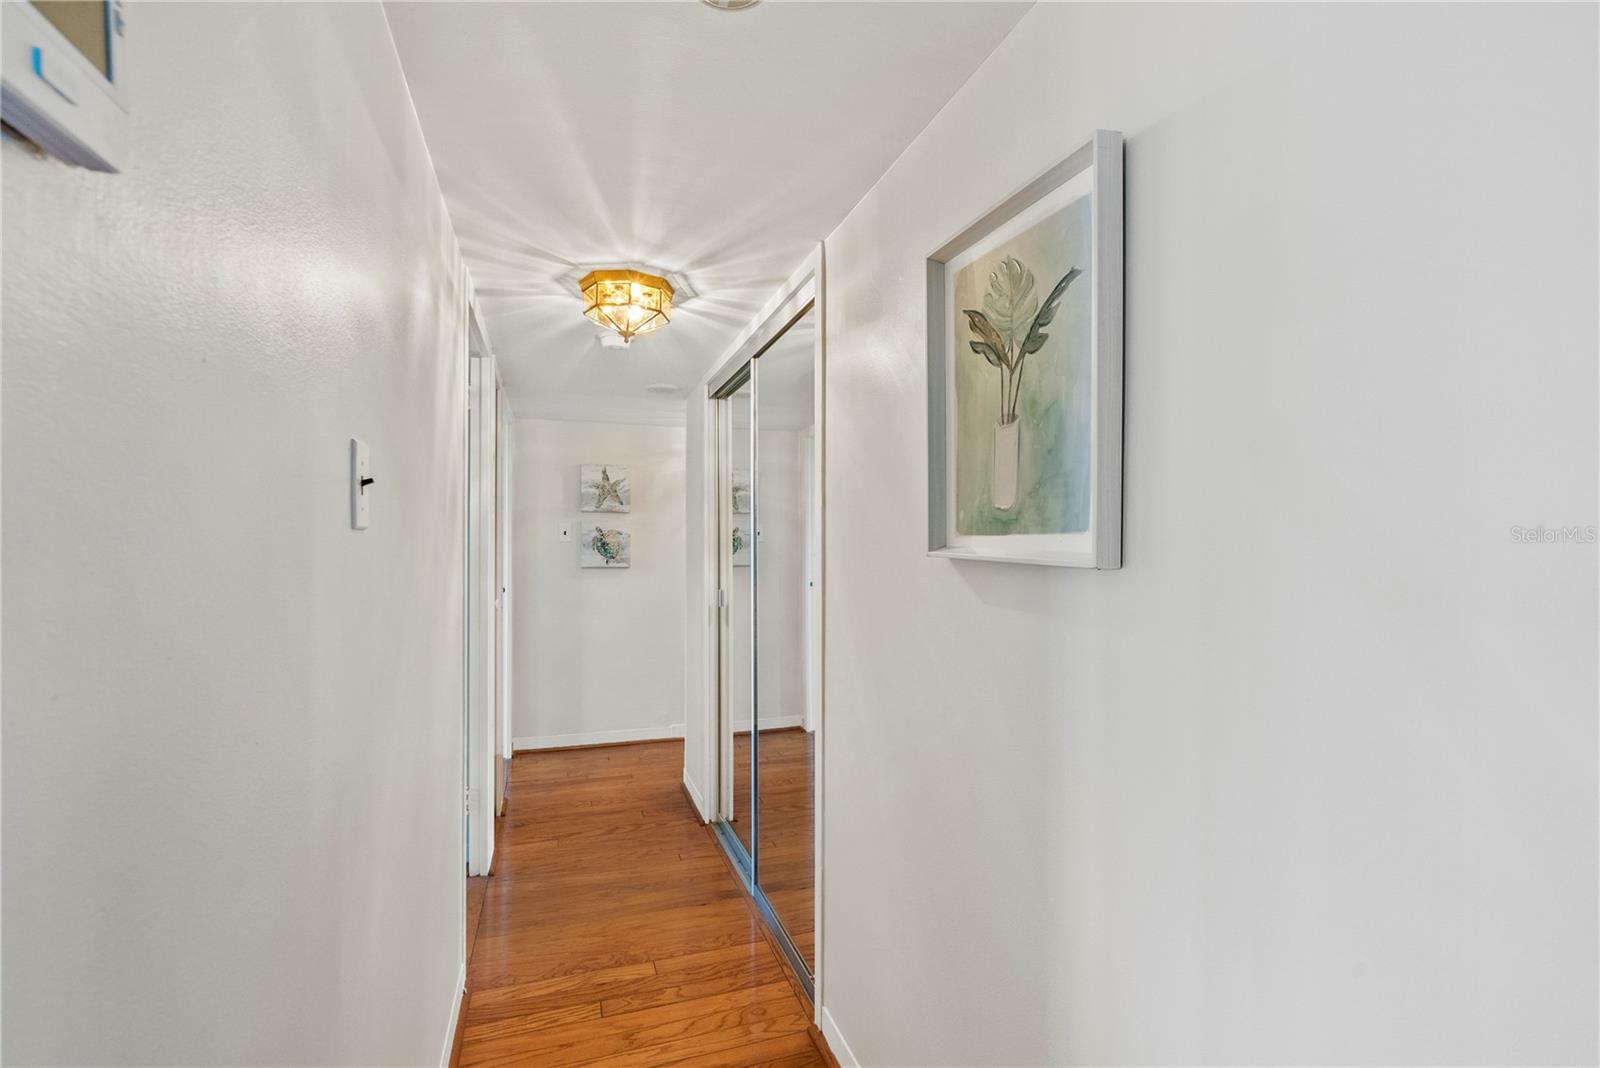 Beautiful Mirrored Double Closets throughout!